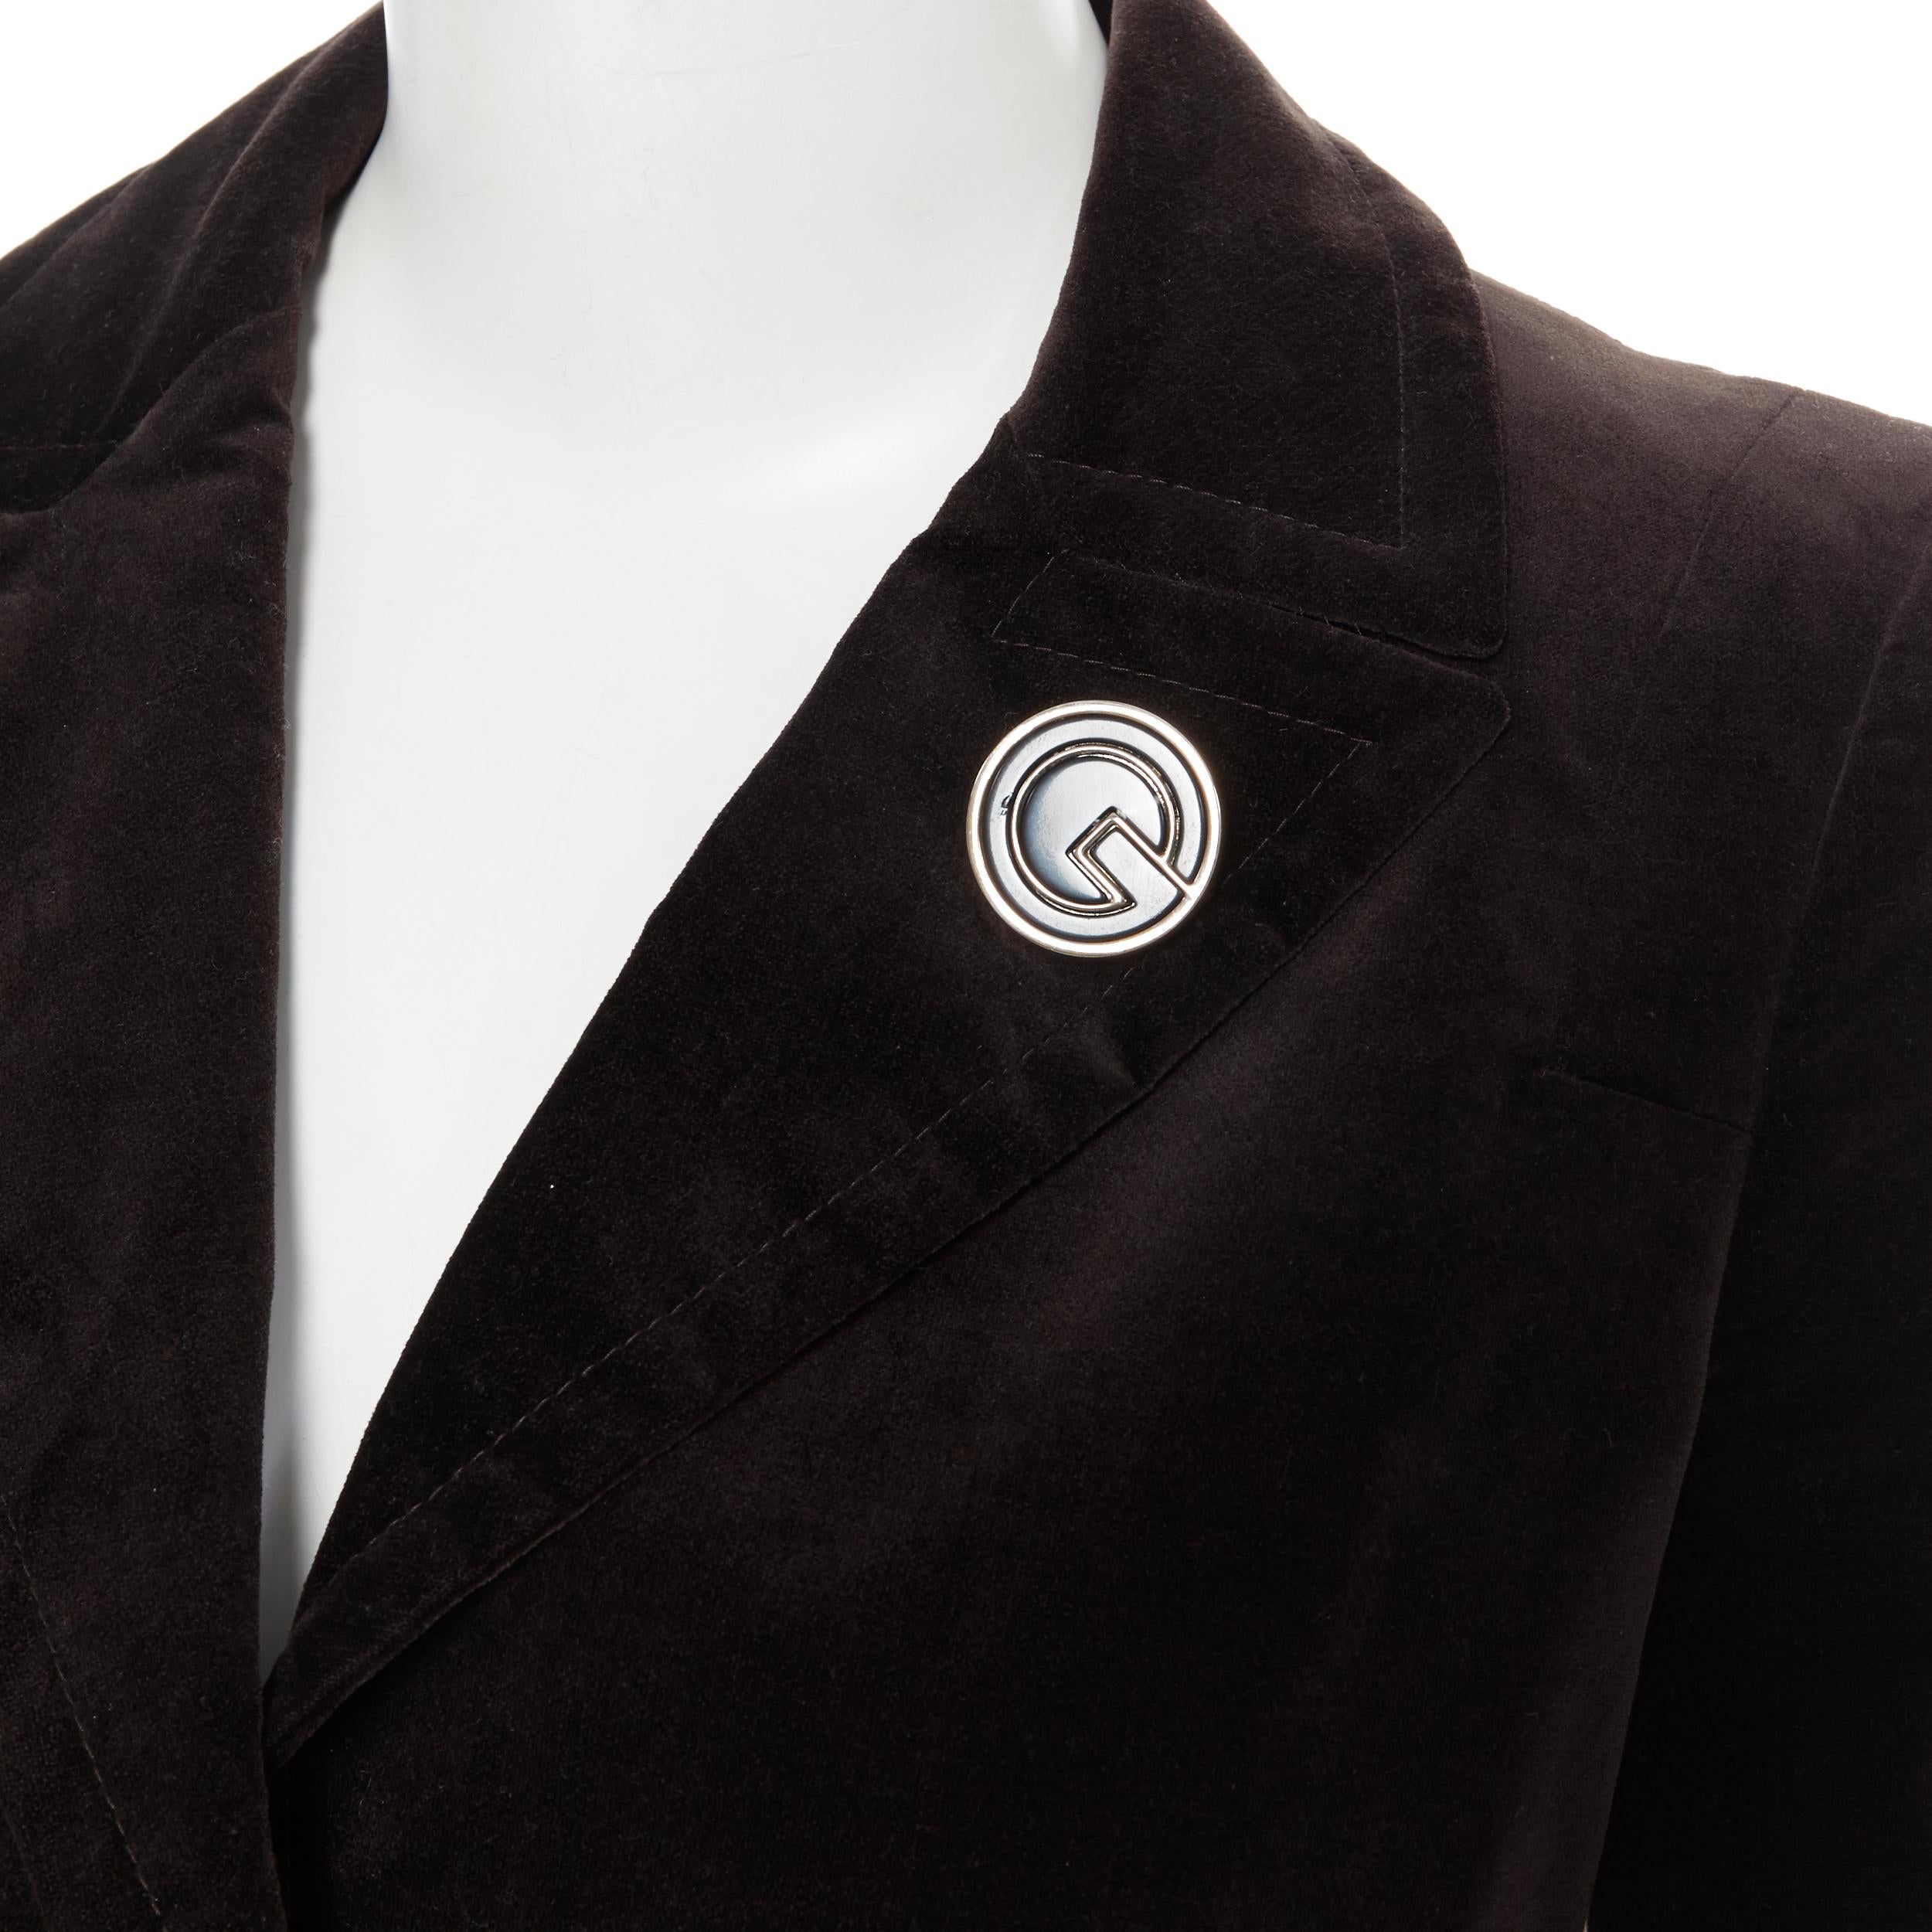 GUCCI 2007 brown velvet G brooch monogram lined fitted blazer jacket IT38 XS
Brand: Gucci
Collection: 2007
Model Name / Style: Velvet blazer
Material: Velvet
Color: Brown
Pattern: Solid
Closure: Button
Lining material: Silk
Extra Detail: Brown